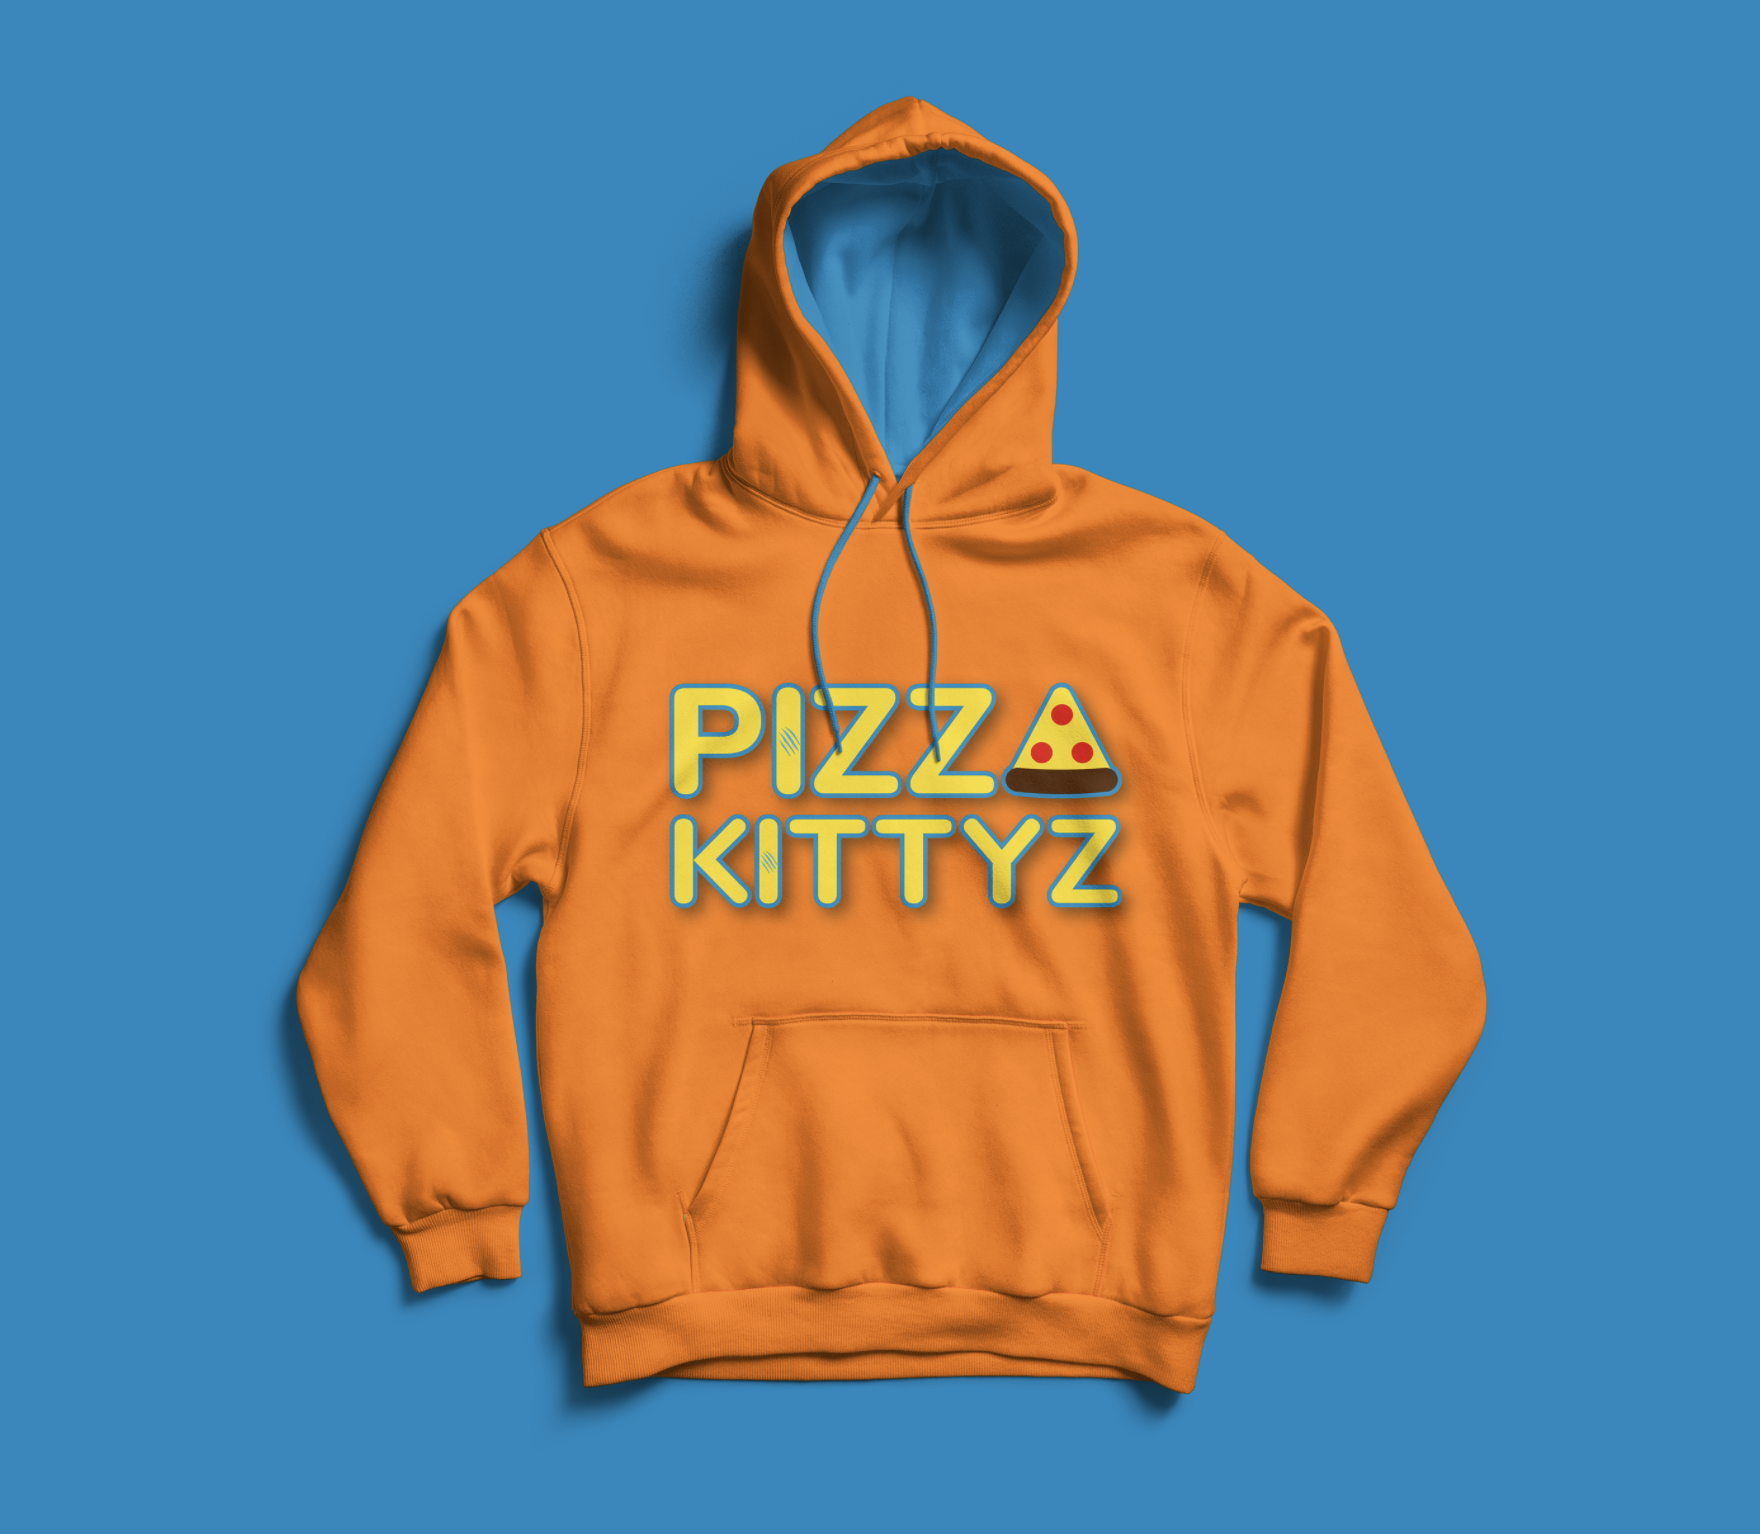 Mockup of orange sweatshirt for Pizza Kittyz fictional brand created by B.F.A. Design student Luis Angeles